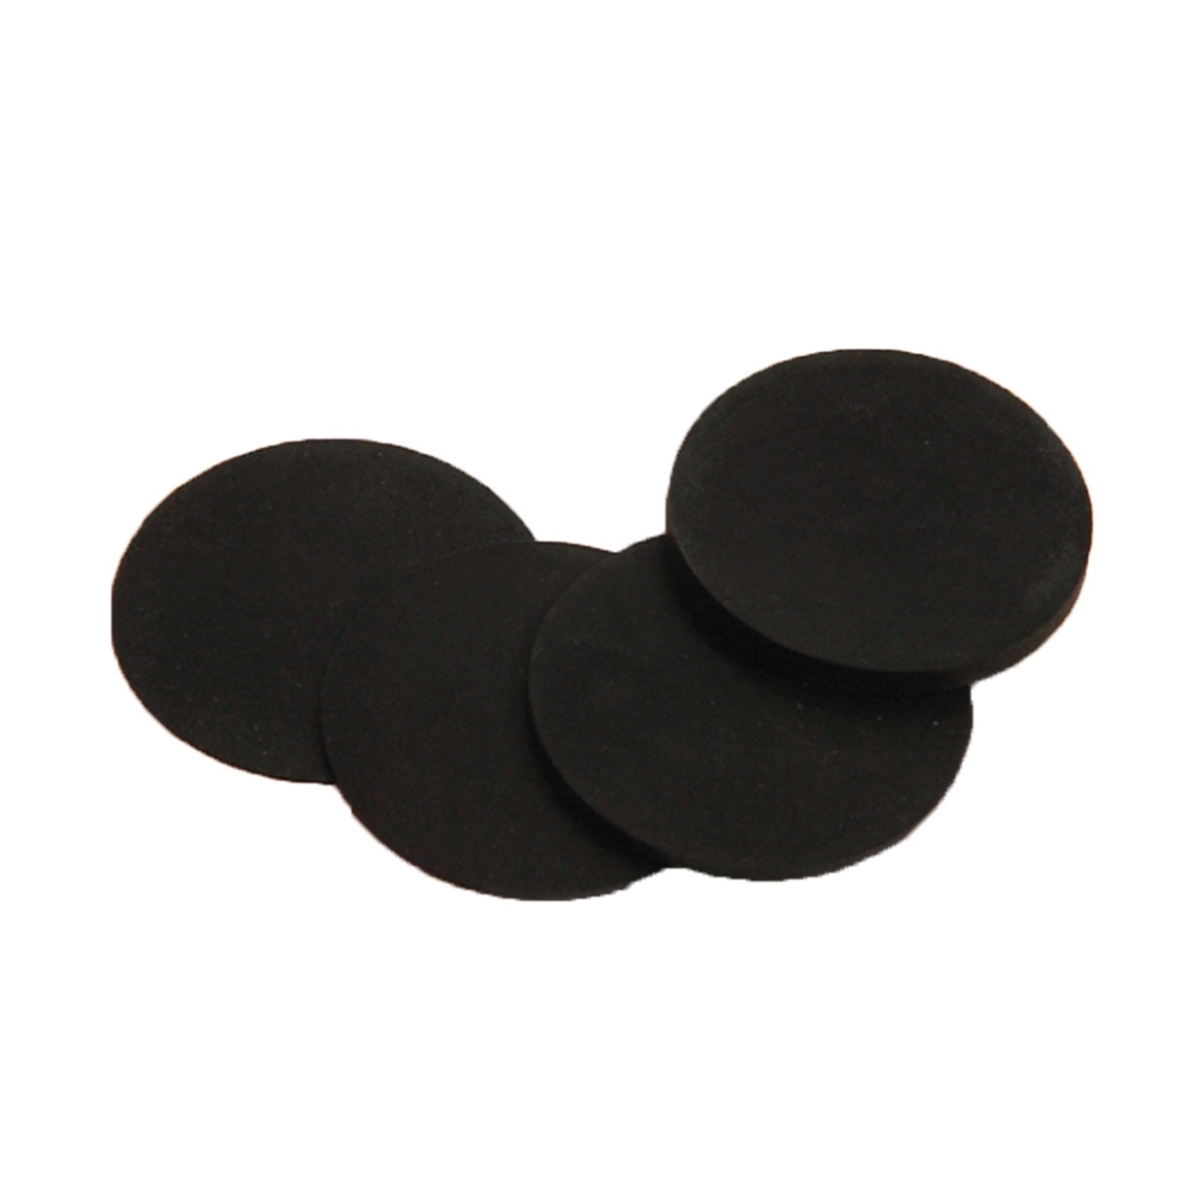 16-237 0.031 In. Rubber Shims Bag - Pack Of 50